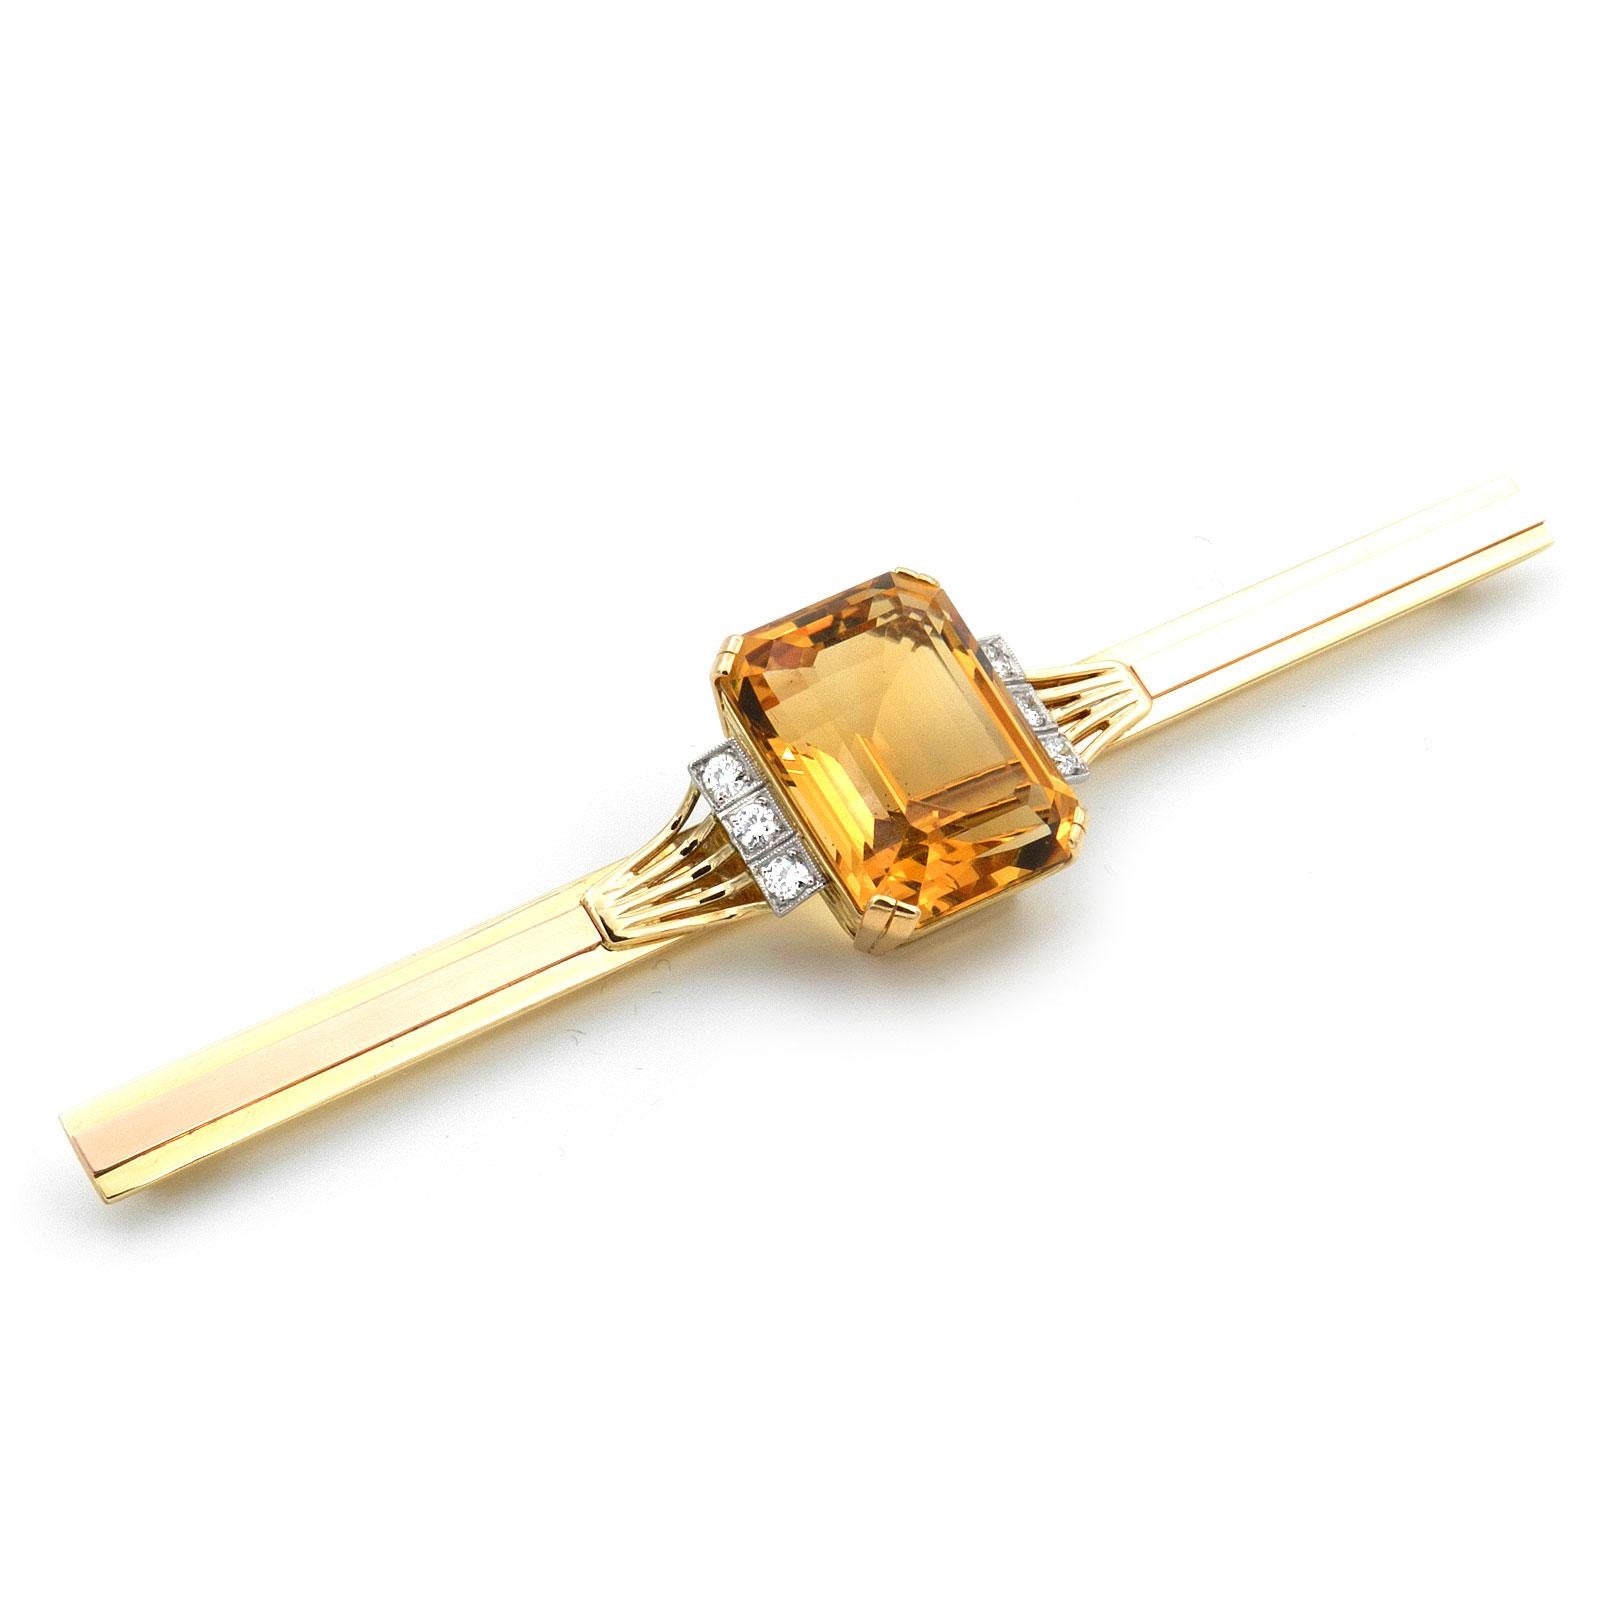 Art Deco 37 Carat Citrine Diamond Gold Bar Brooch, circa 1930

This nearly 5 inch extra-long bar brooch is made of yellow and red gold, the front side accentuated with a strip of red gold and decorated with delicate gold wires, centrally set with a